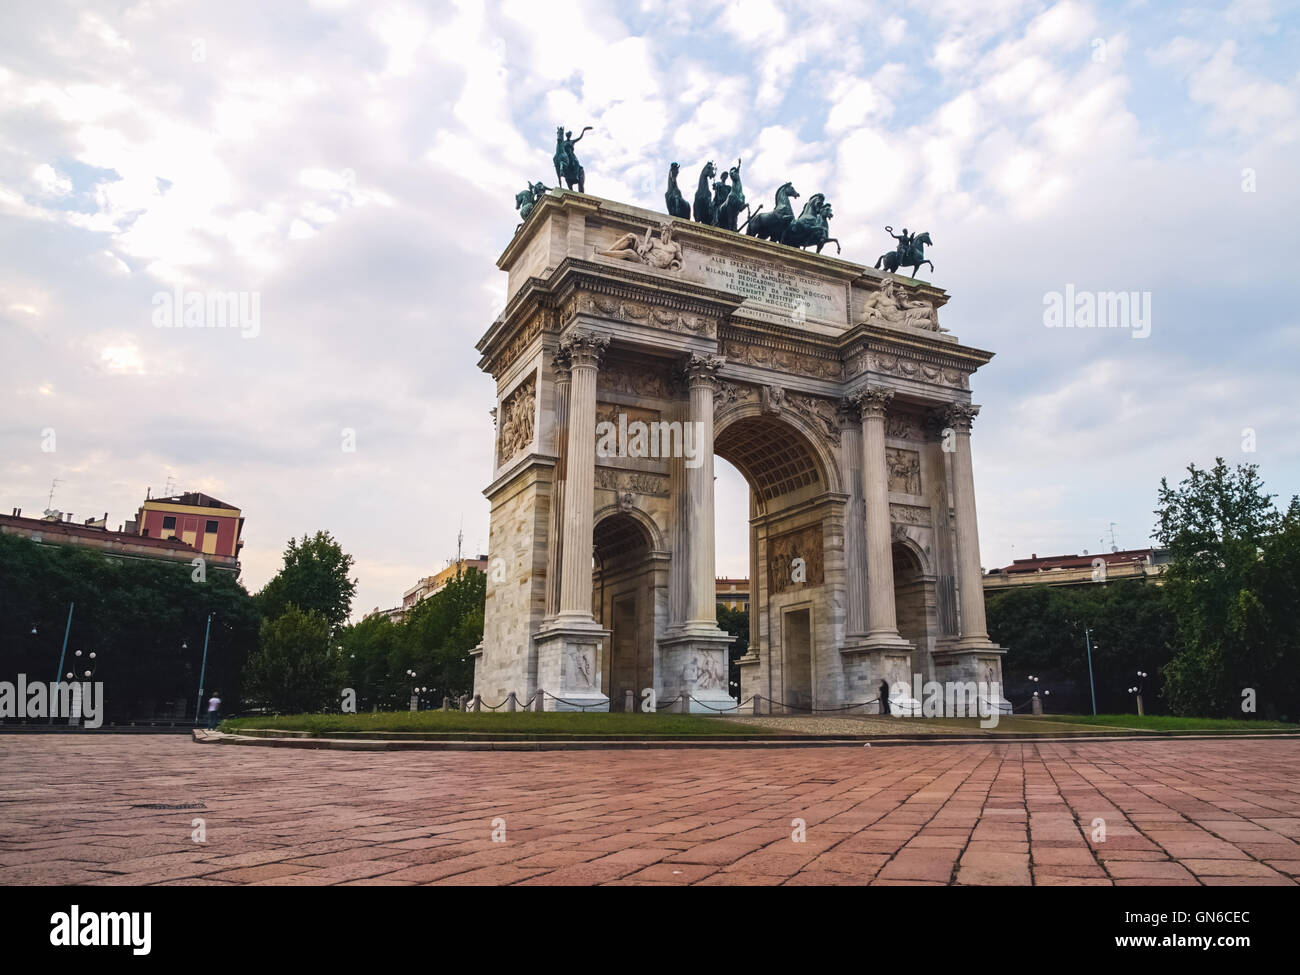 Classical Arch and People in a square Stock Photo